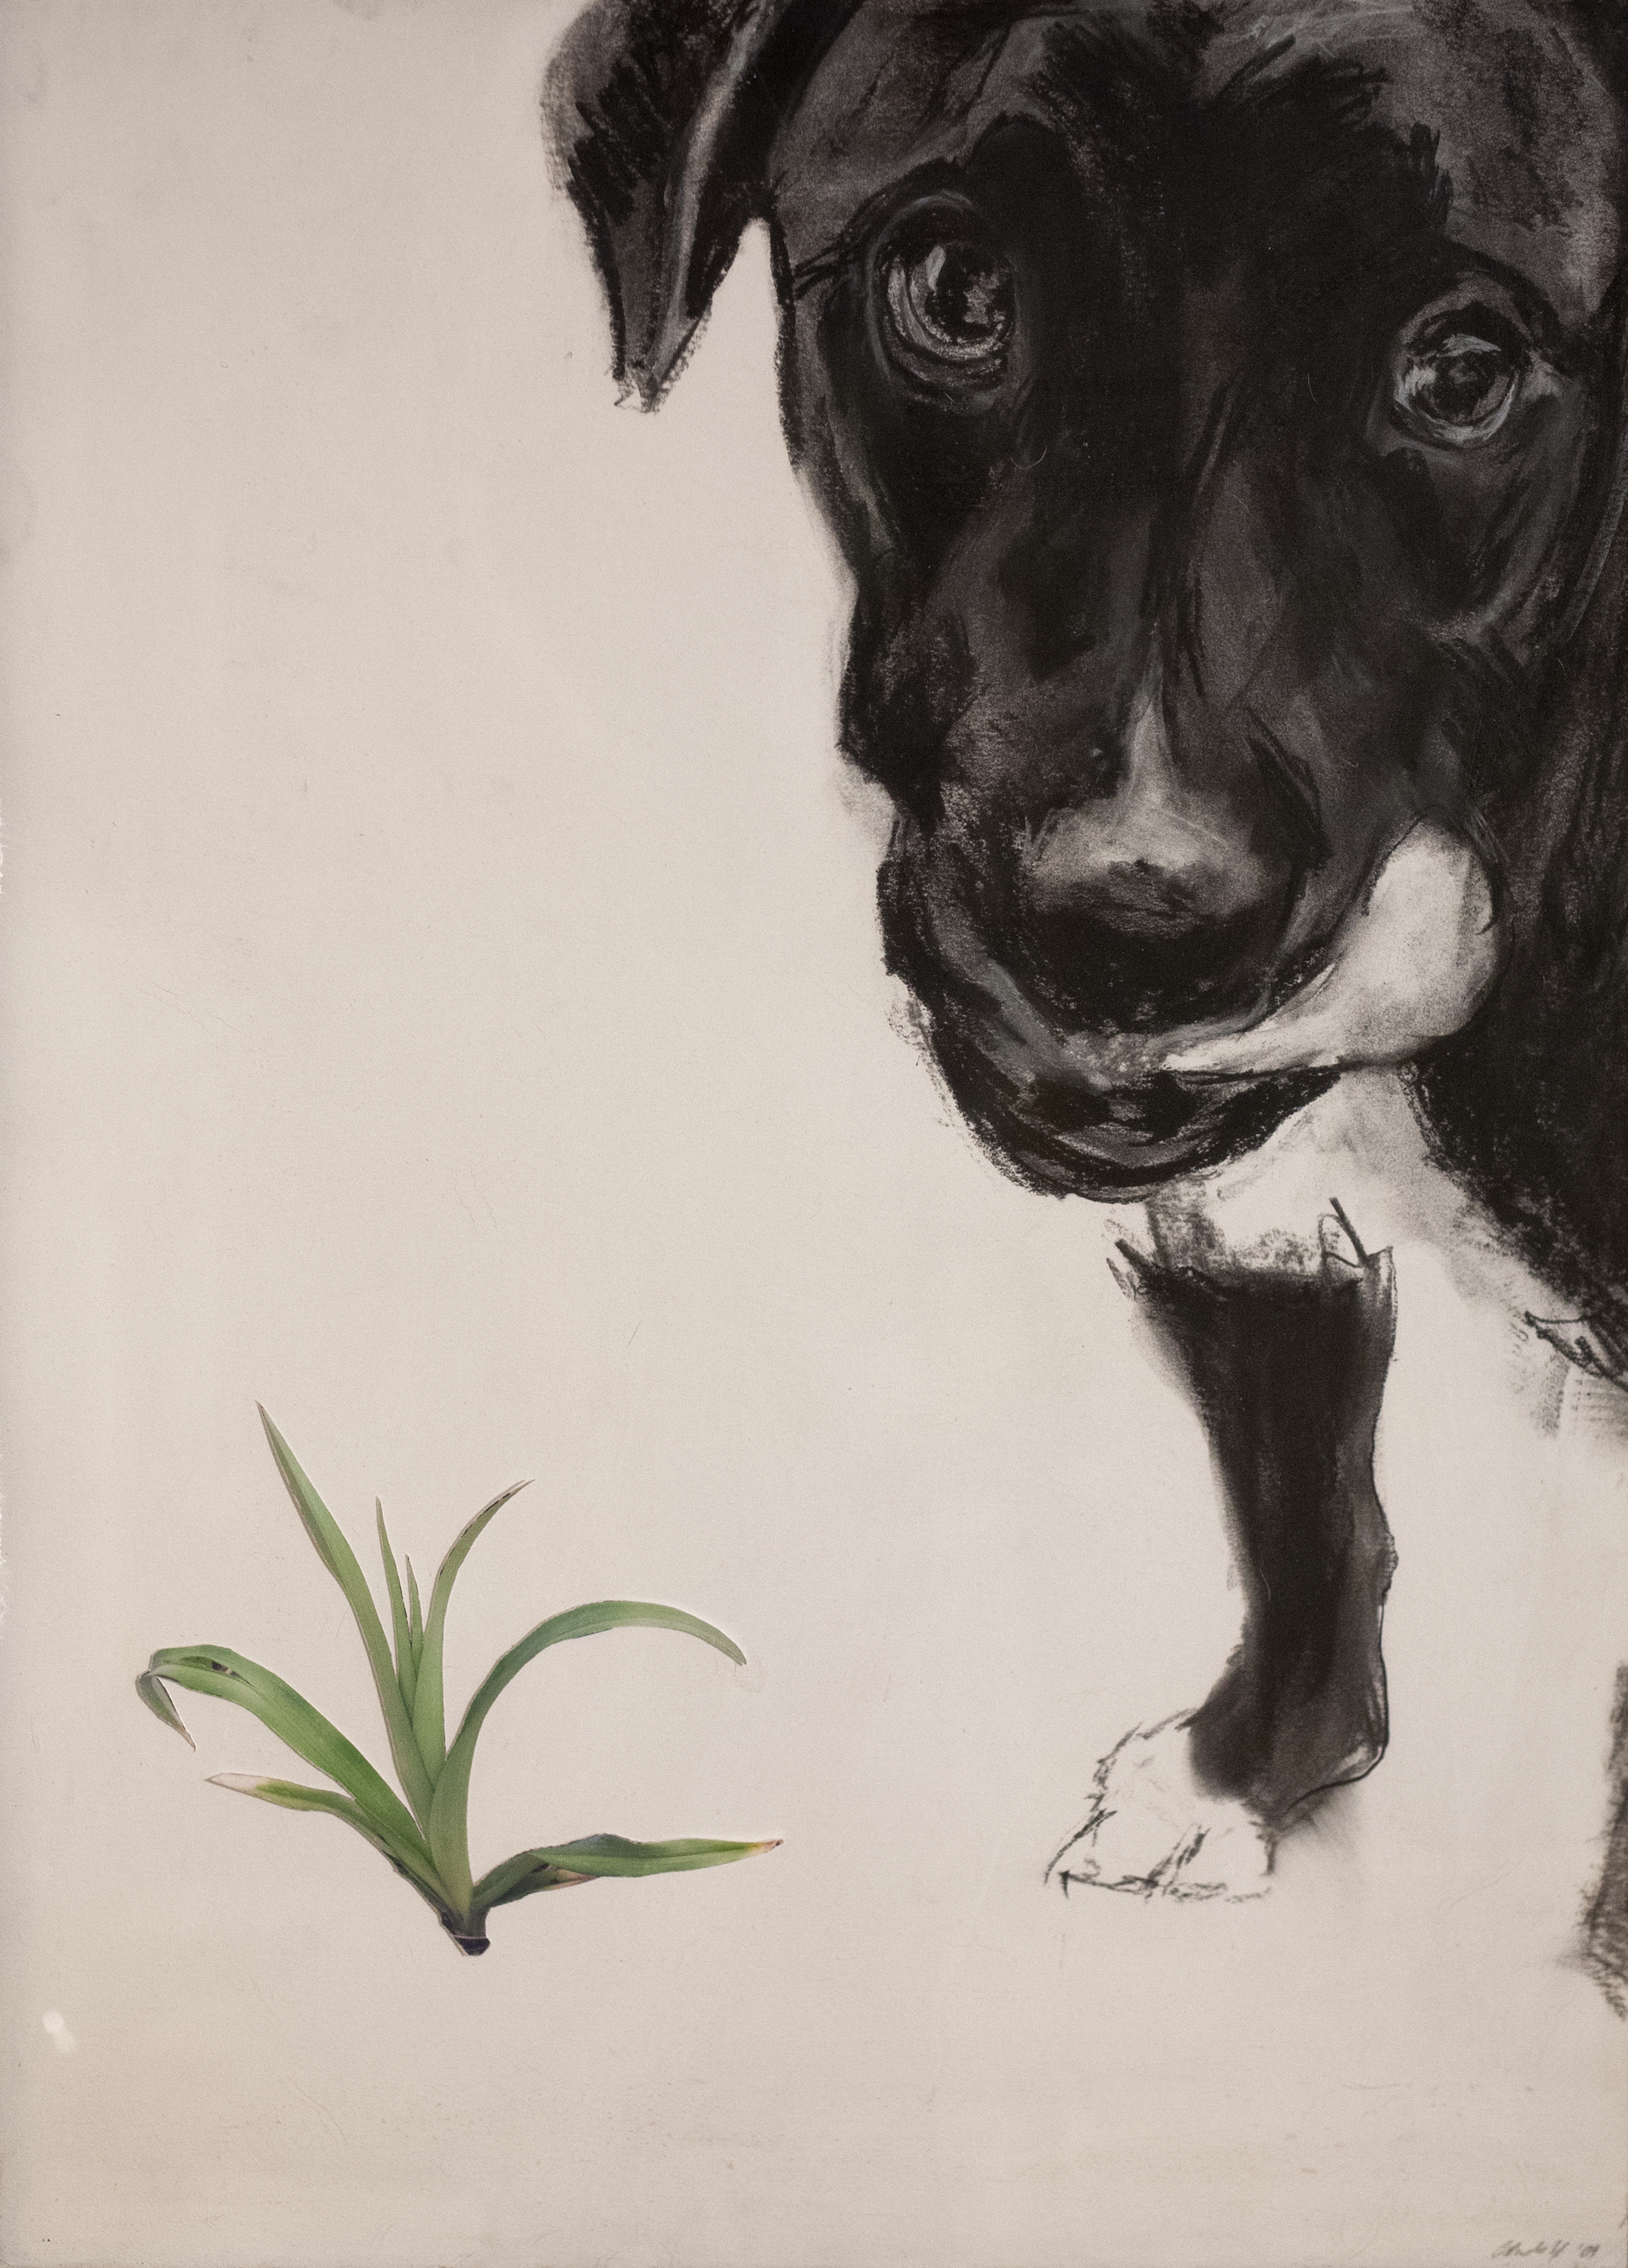 PSPCA Series: Sprout